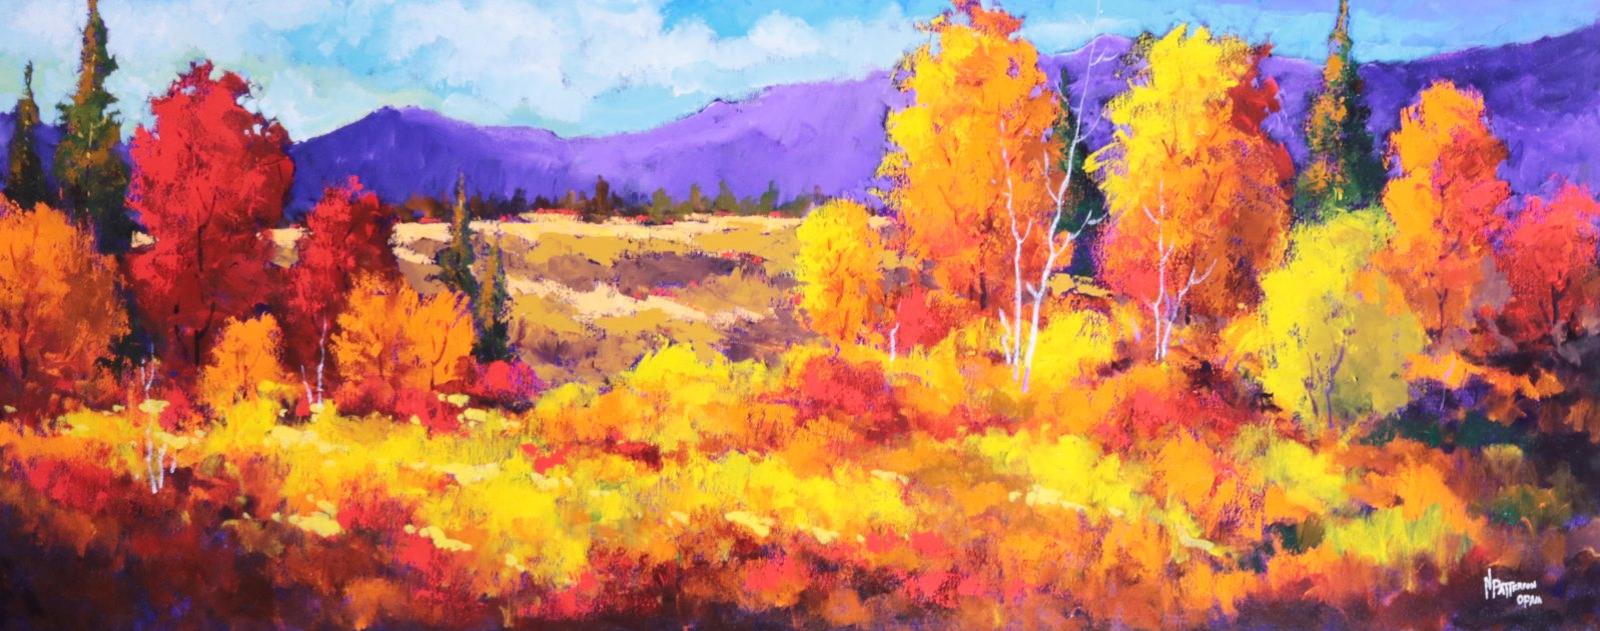 Neil Patterson (1947) - Fall Foothills; 2014